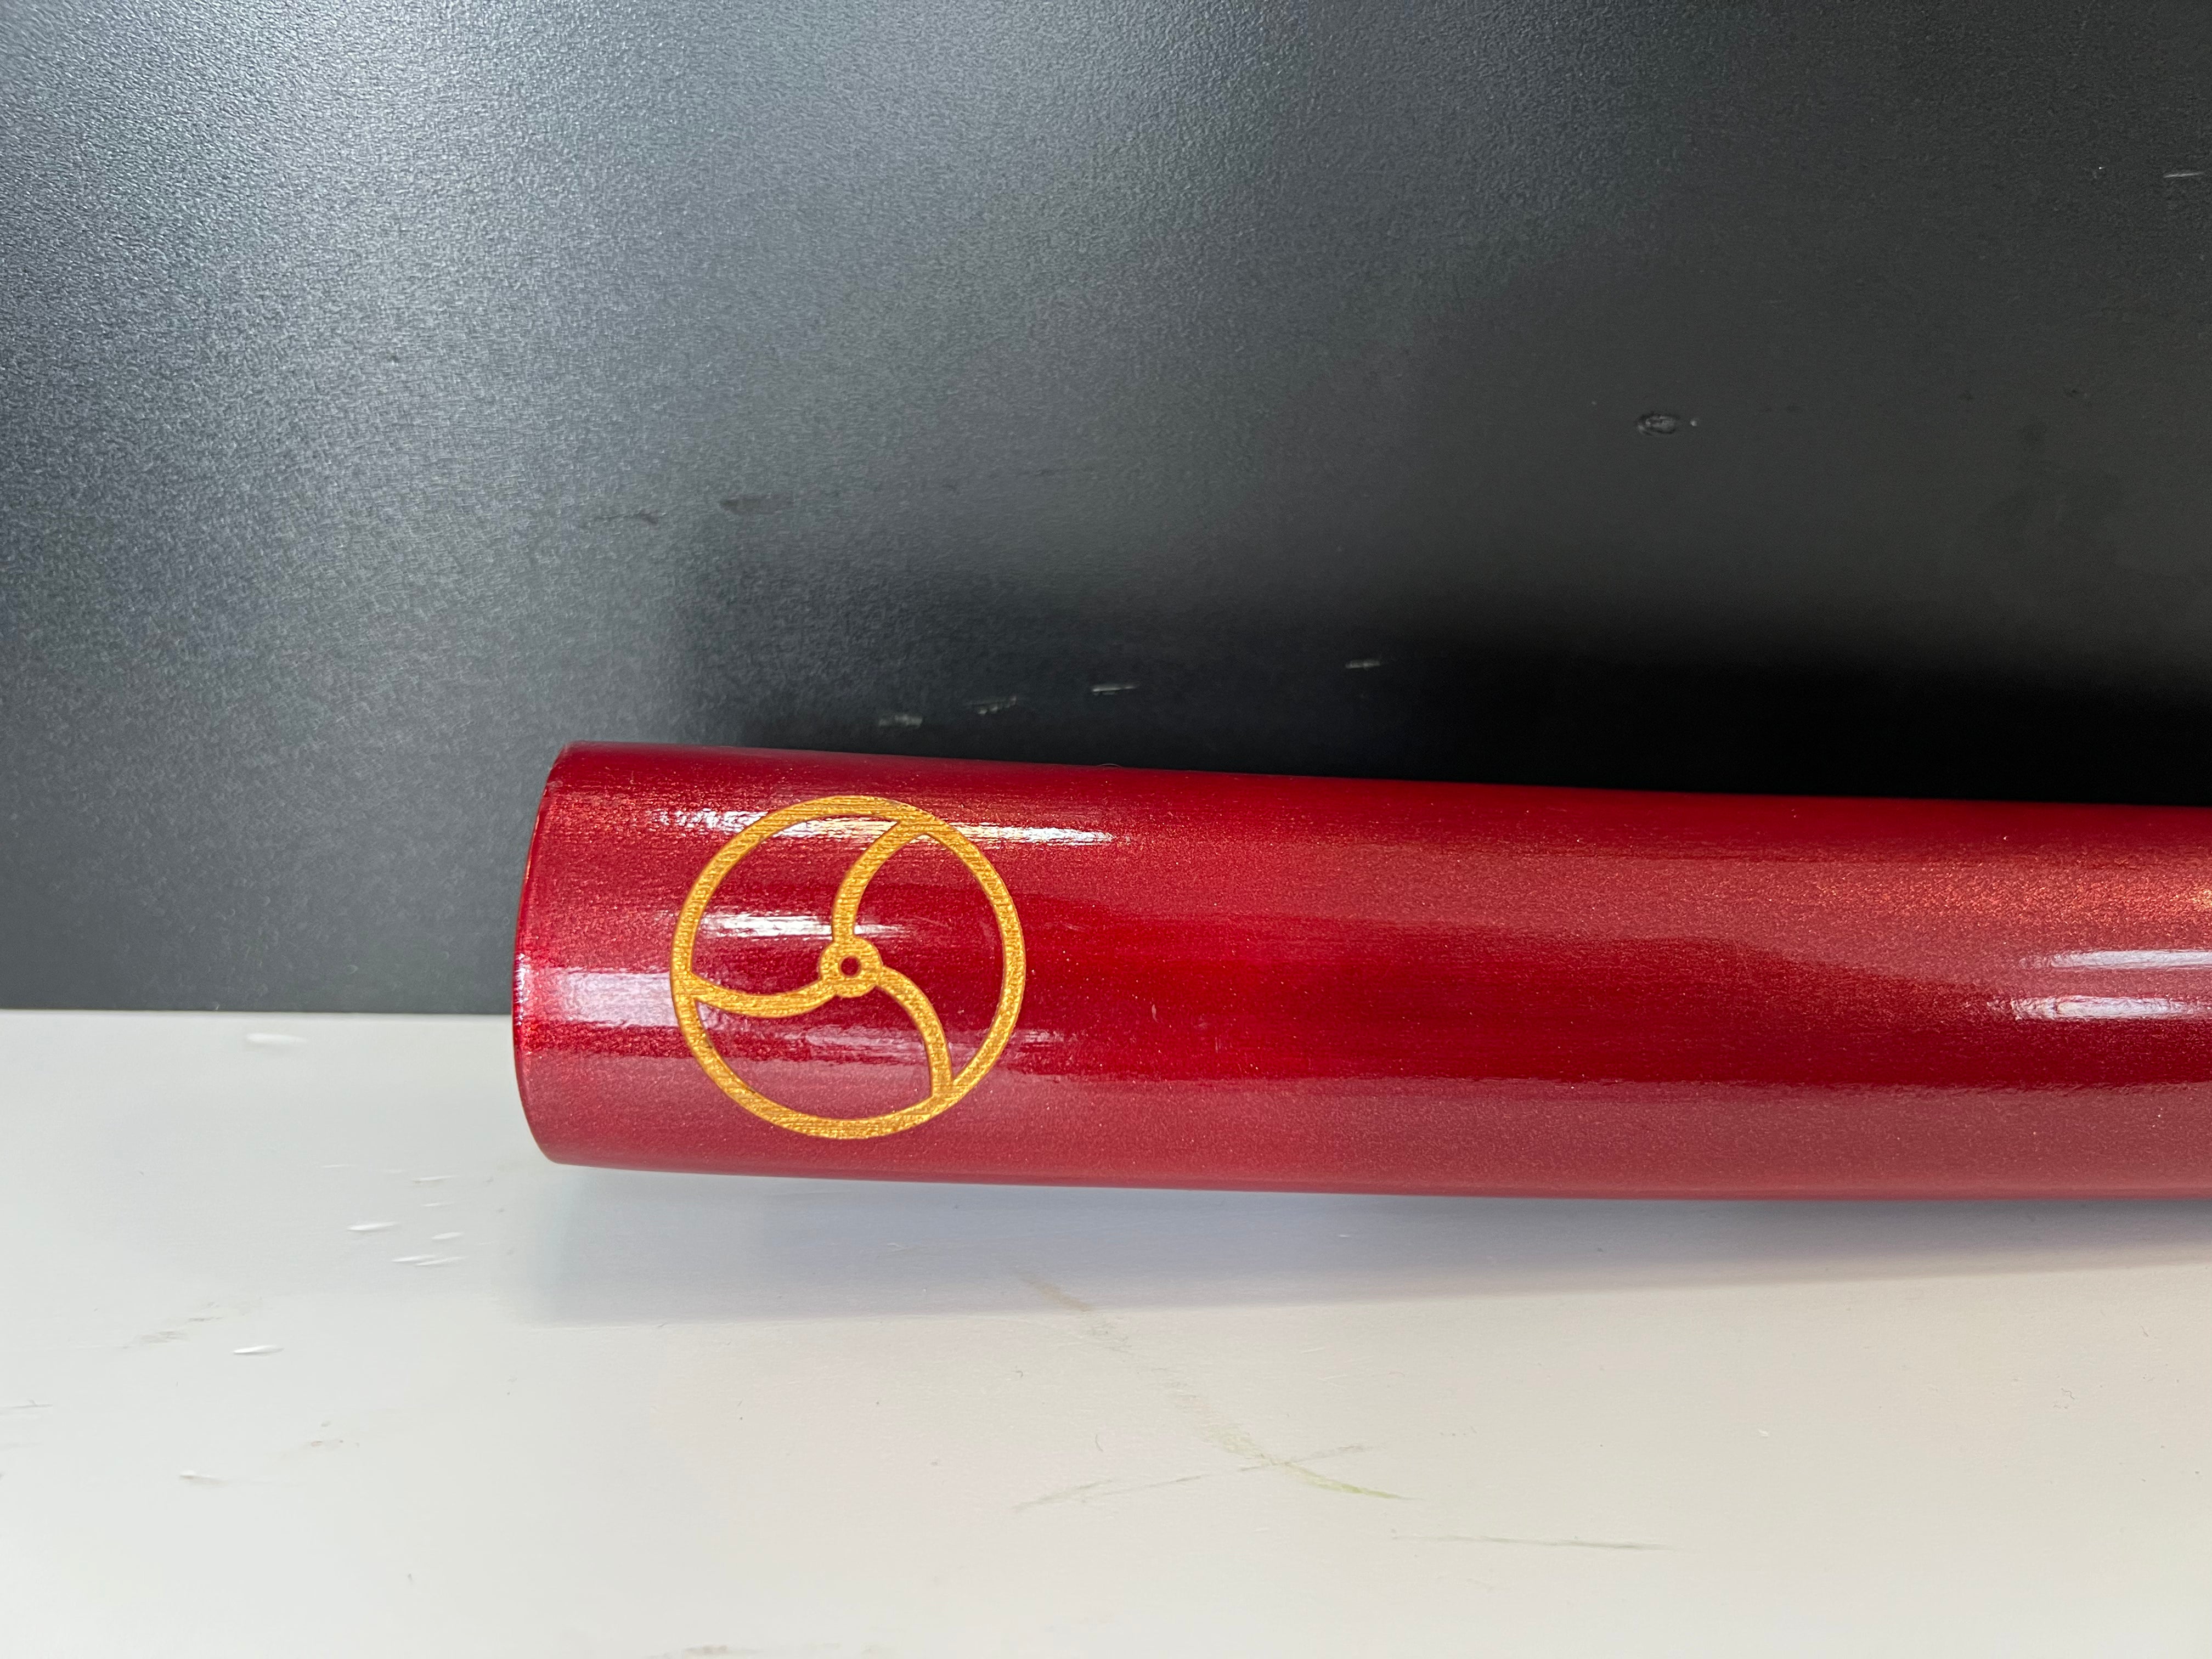 Katana in red with the seal of heaven (tomoe)